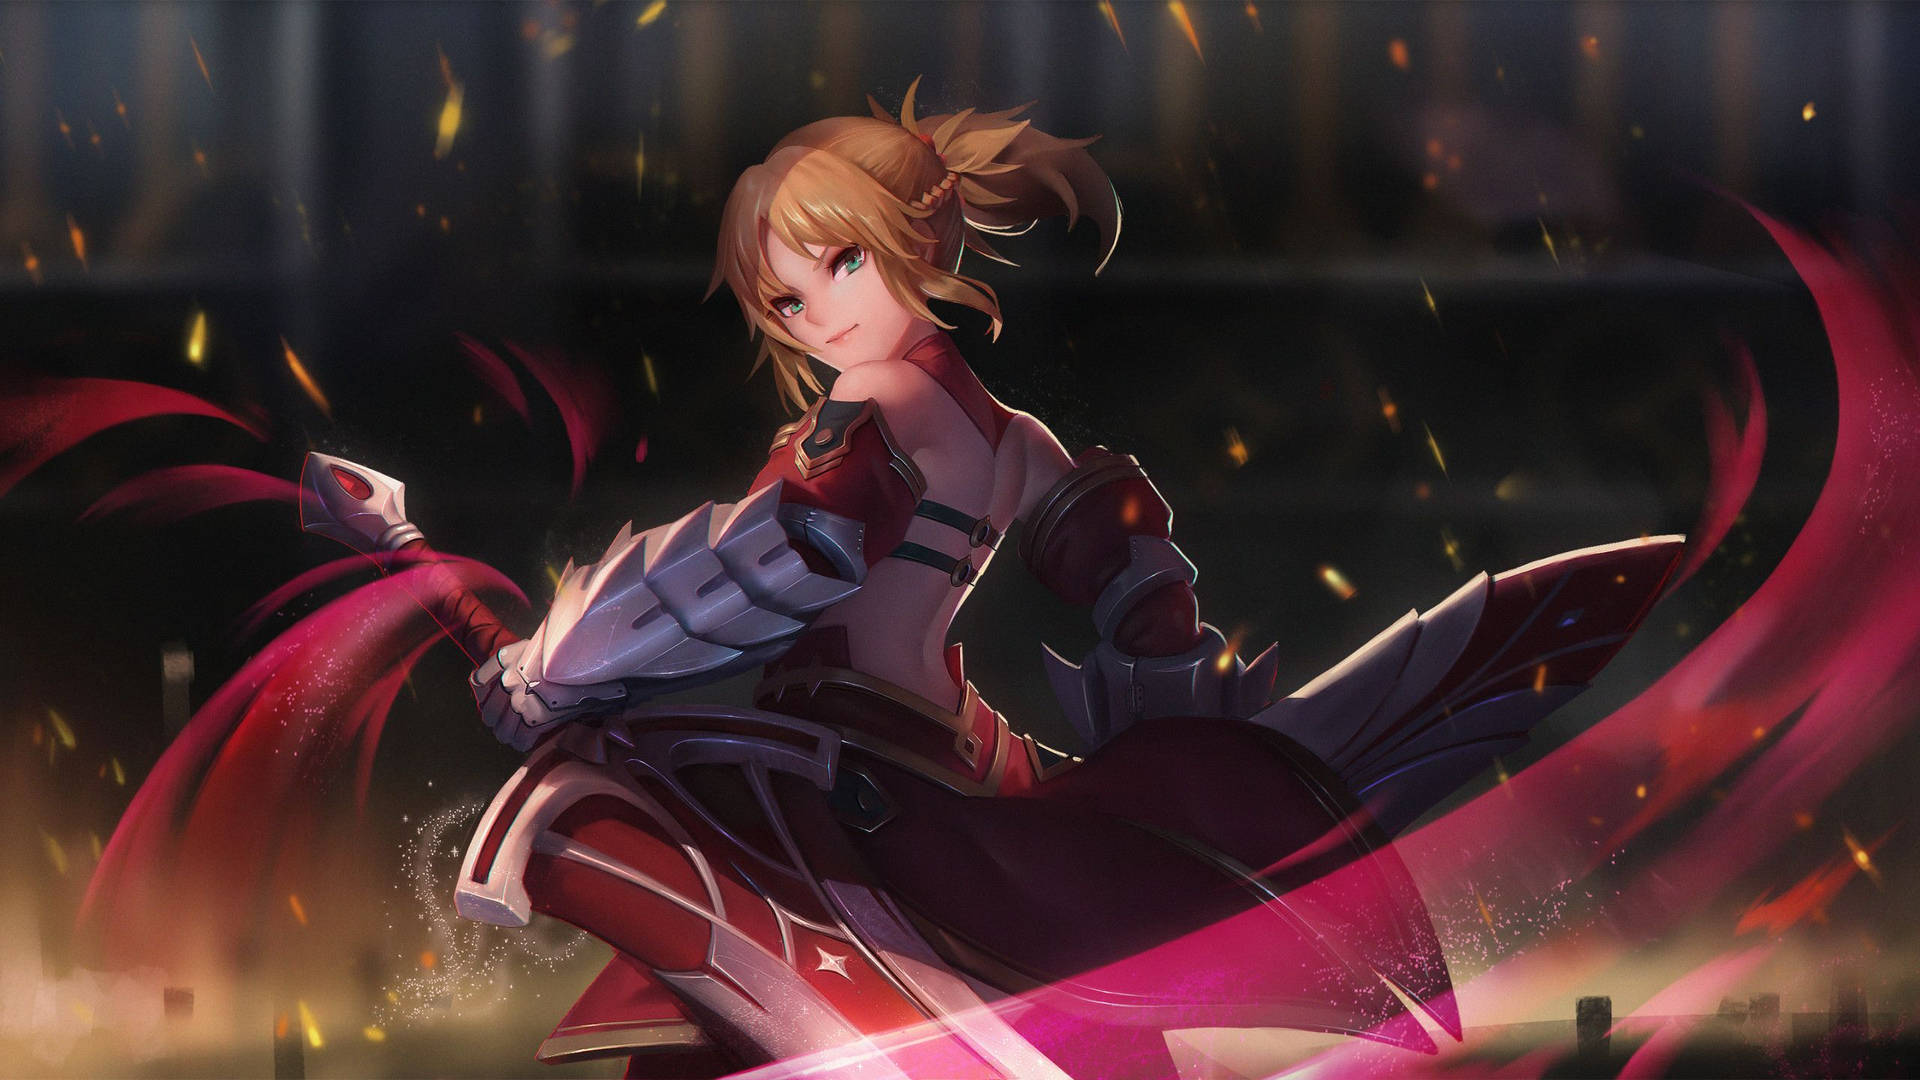 Saber Of Red From Fate Background